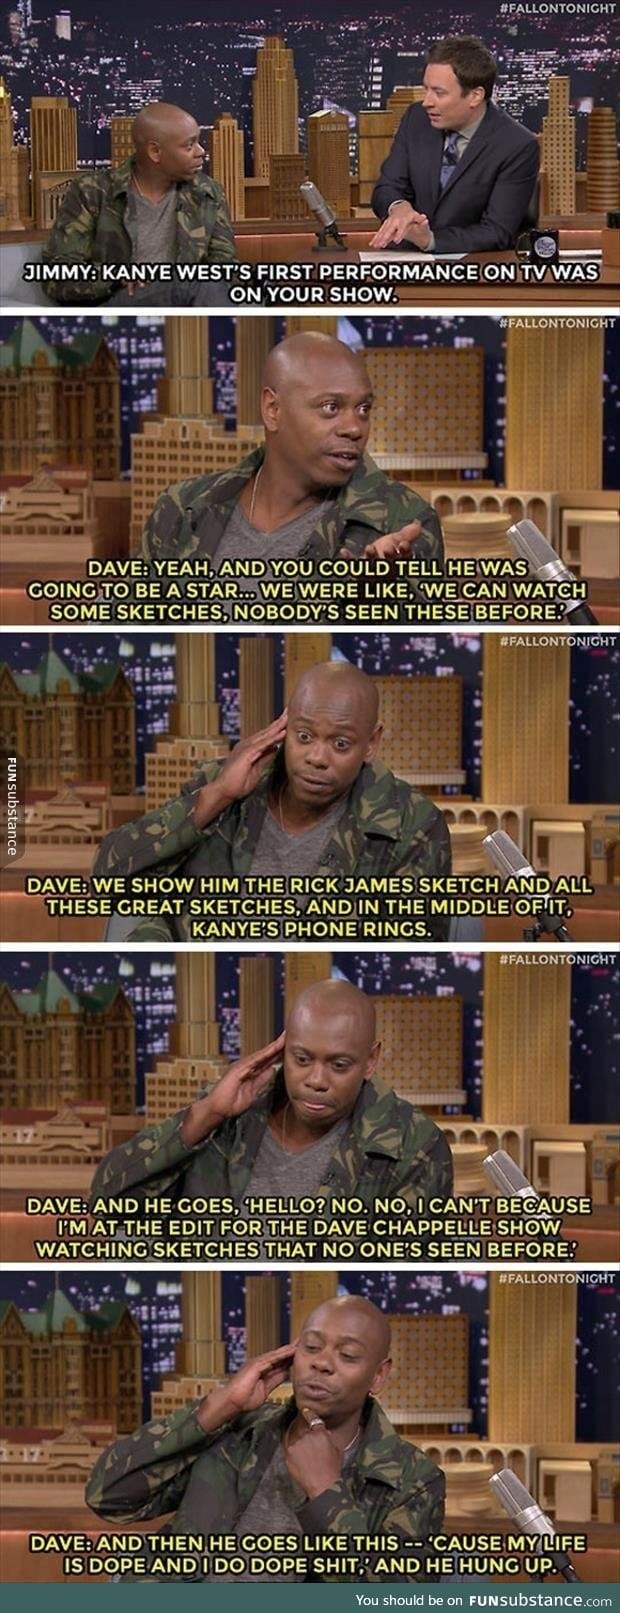 Dave Chappelle talks about Kanye West